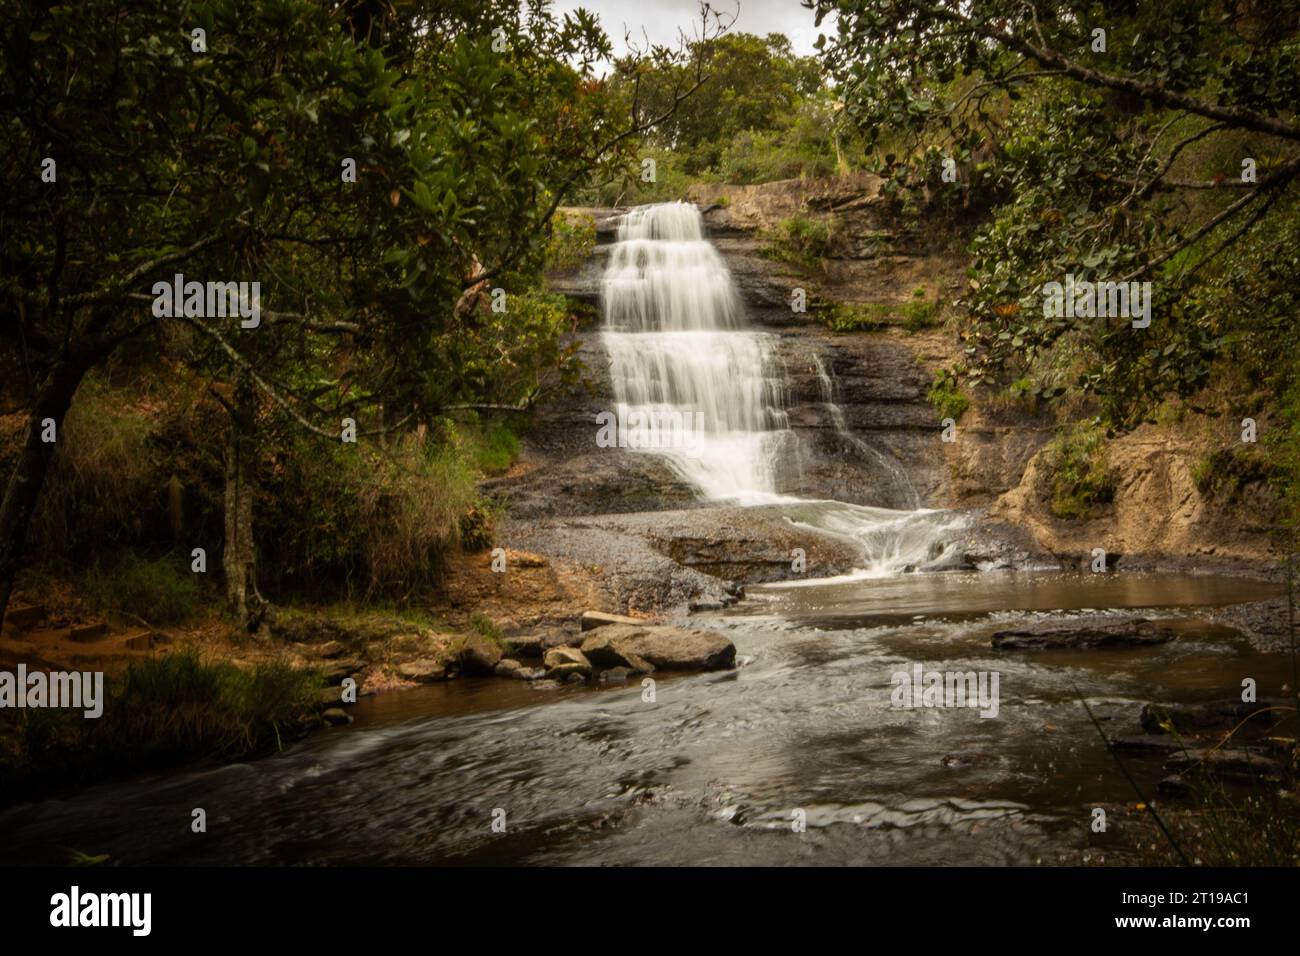 Beautiful waterfall in the jungles of Colombia Stock Photo